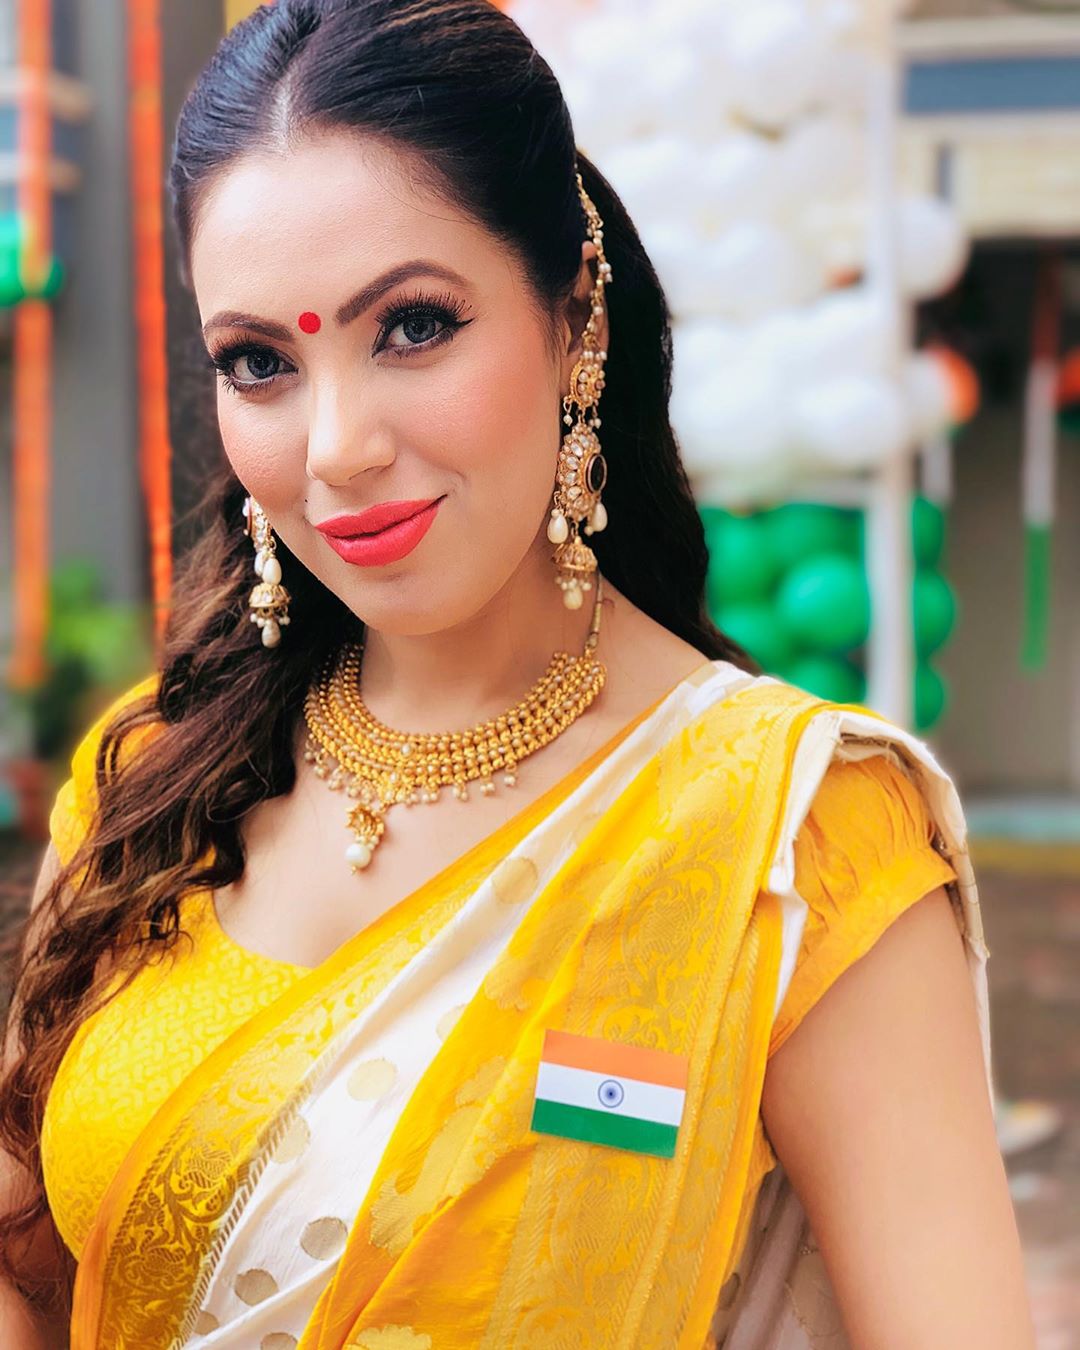 Munmun Dutta shares adorable picture from the sets of 